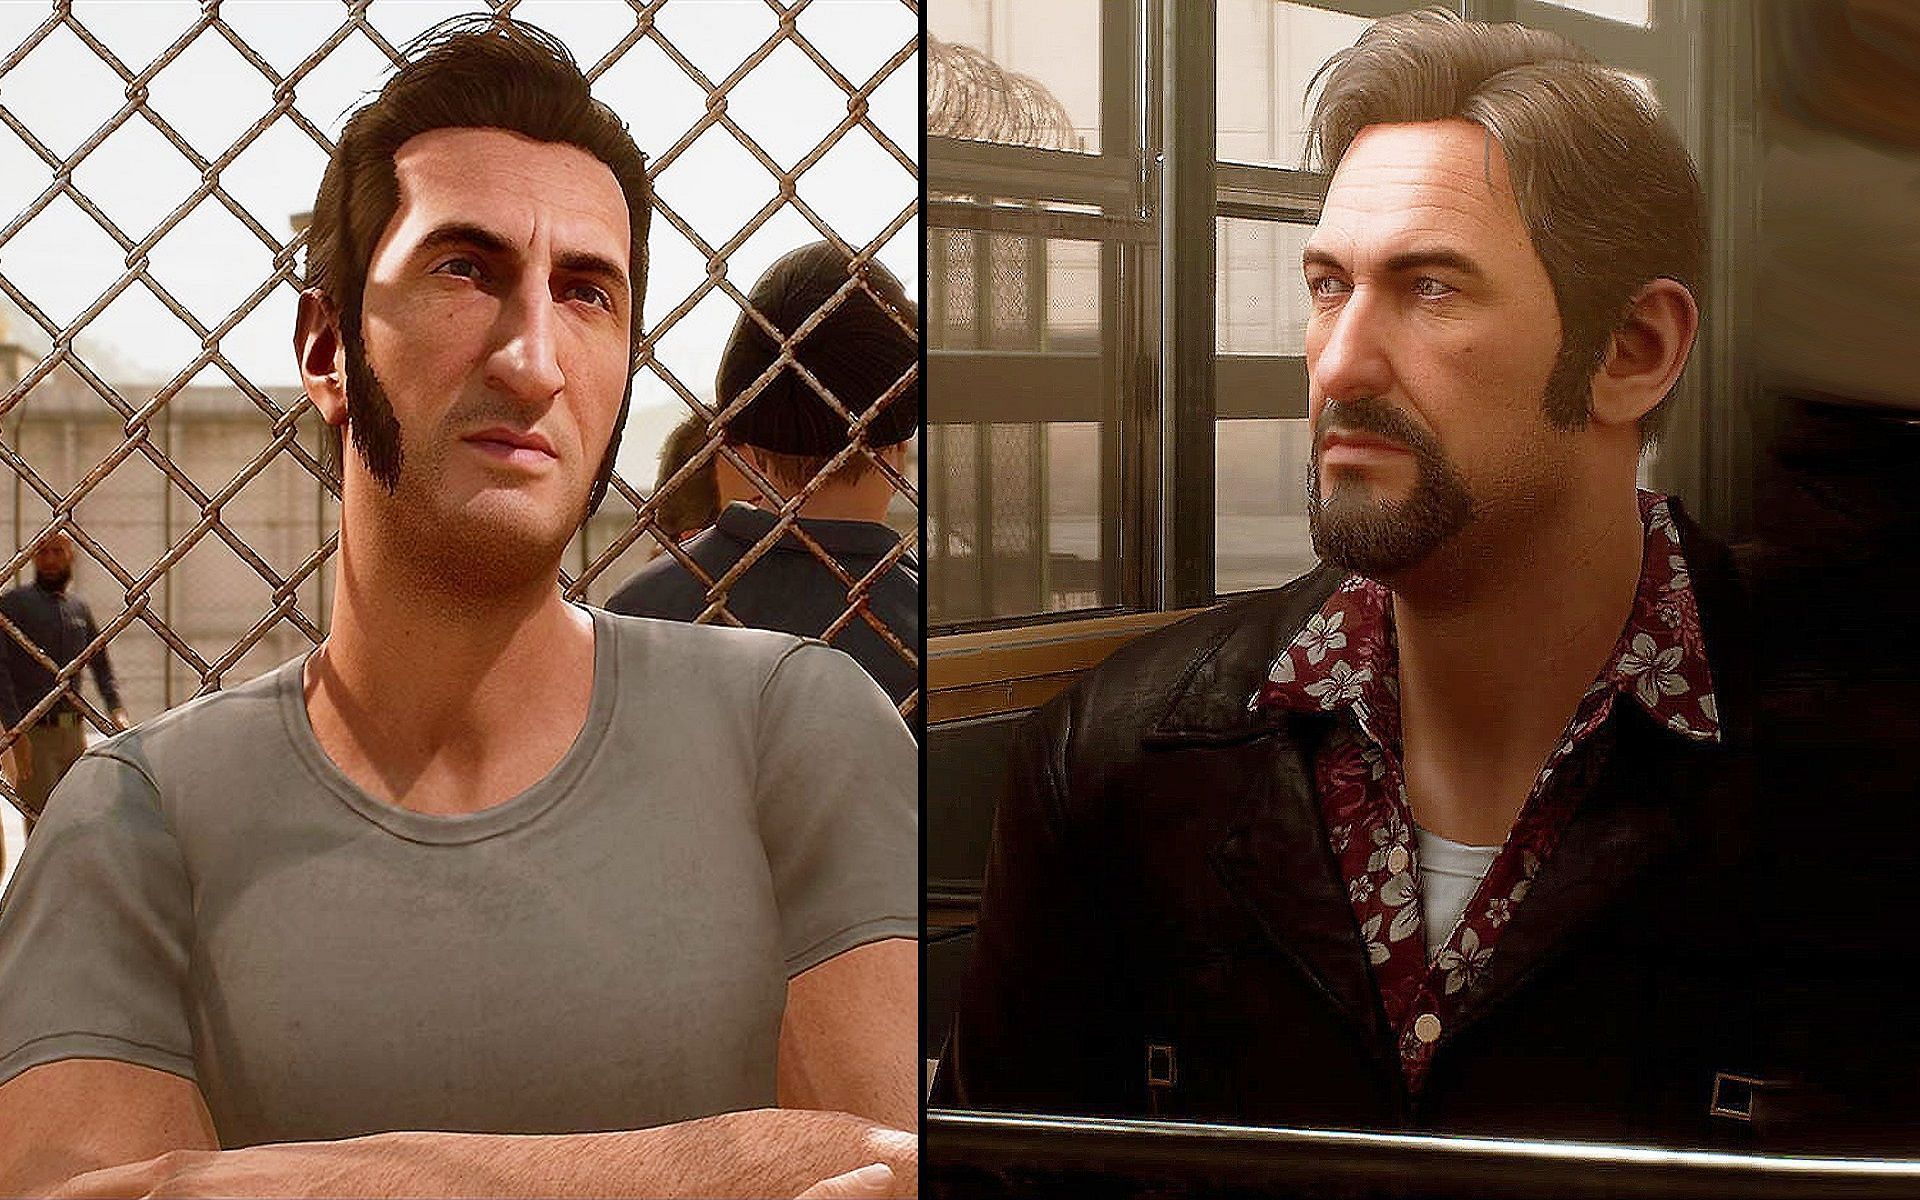 A way out game. Эй Вэй аут. A way out Лео. A way out ps4 геймплей. A way out персонажи.